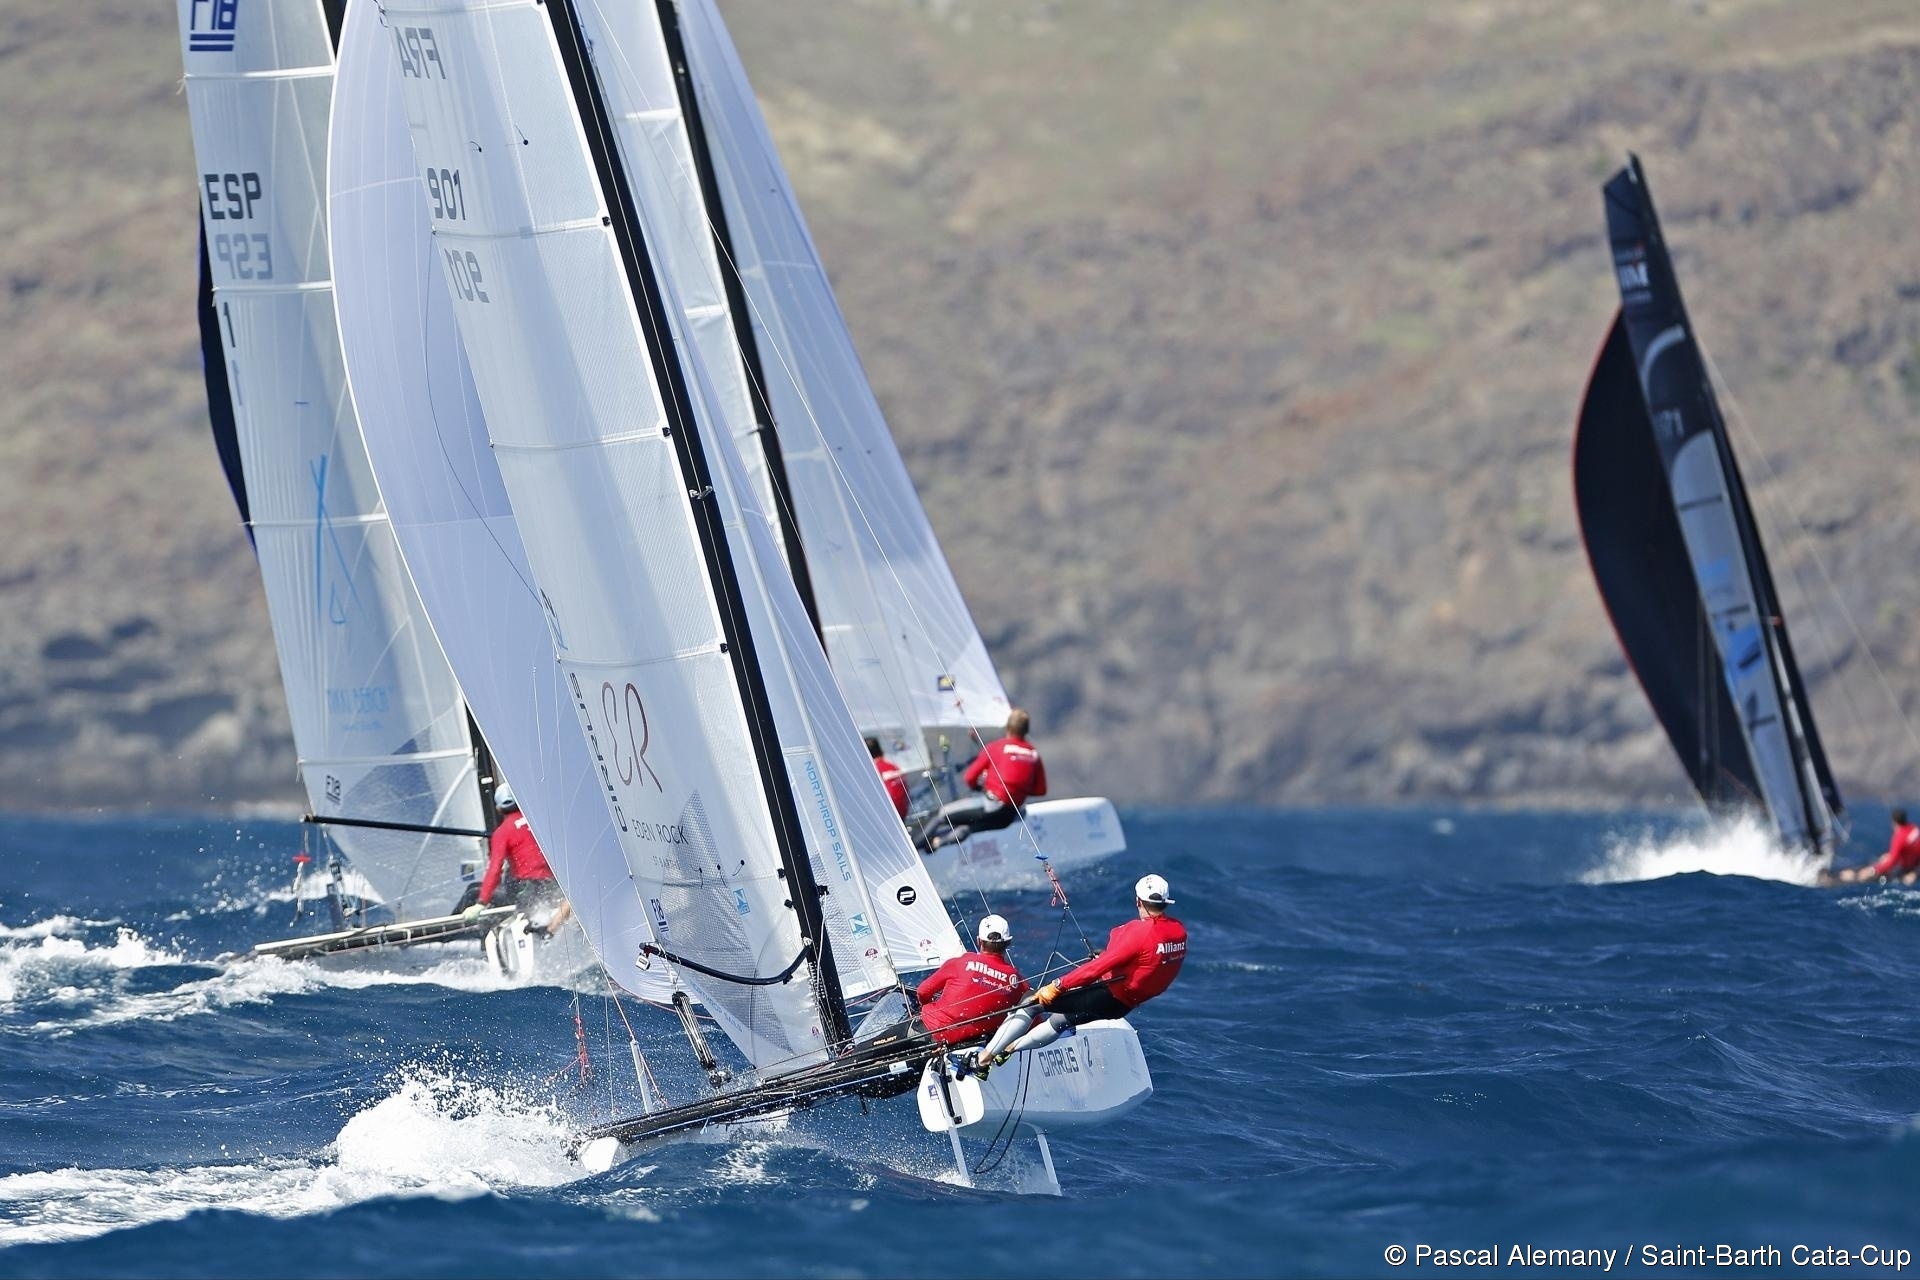  Multihulls  StBarth Cata Cup 2018, StBarthelemy FRA, final results, Stroebel/Risoer USA 11th best NorAm team